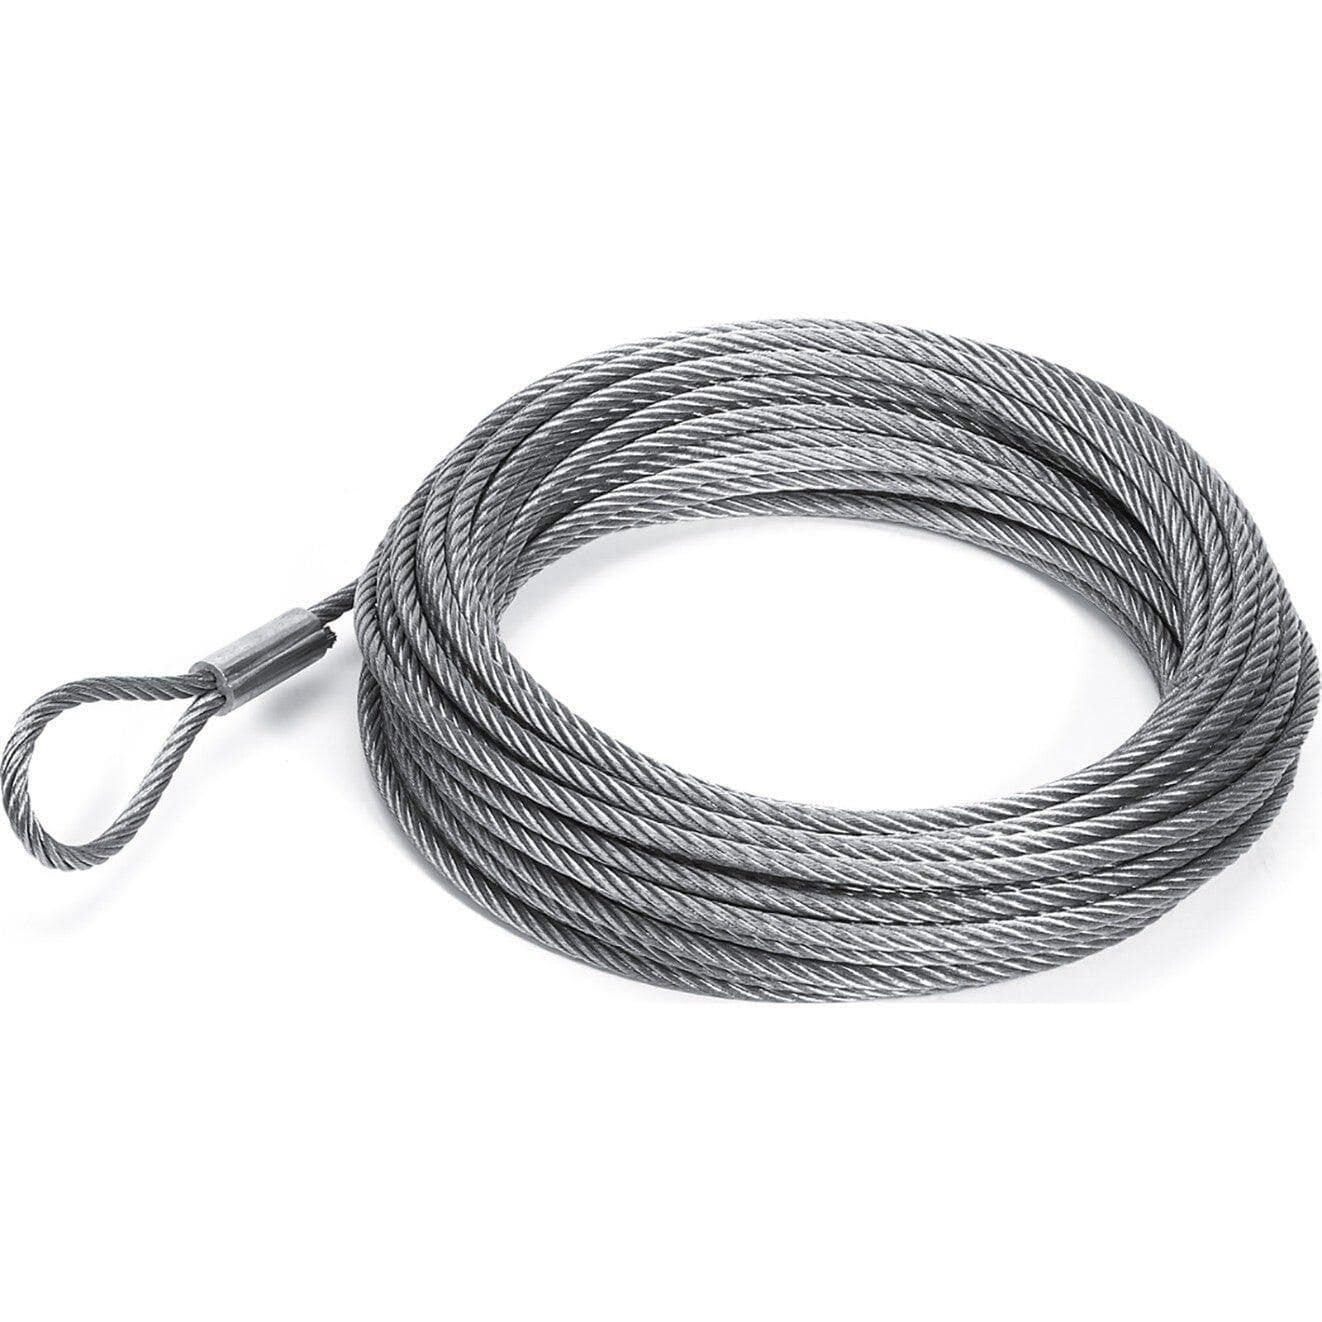 Wire Rope Replacement - 55’ of 1/4” - Factory Recreation